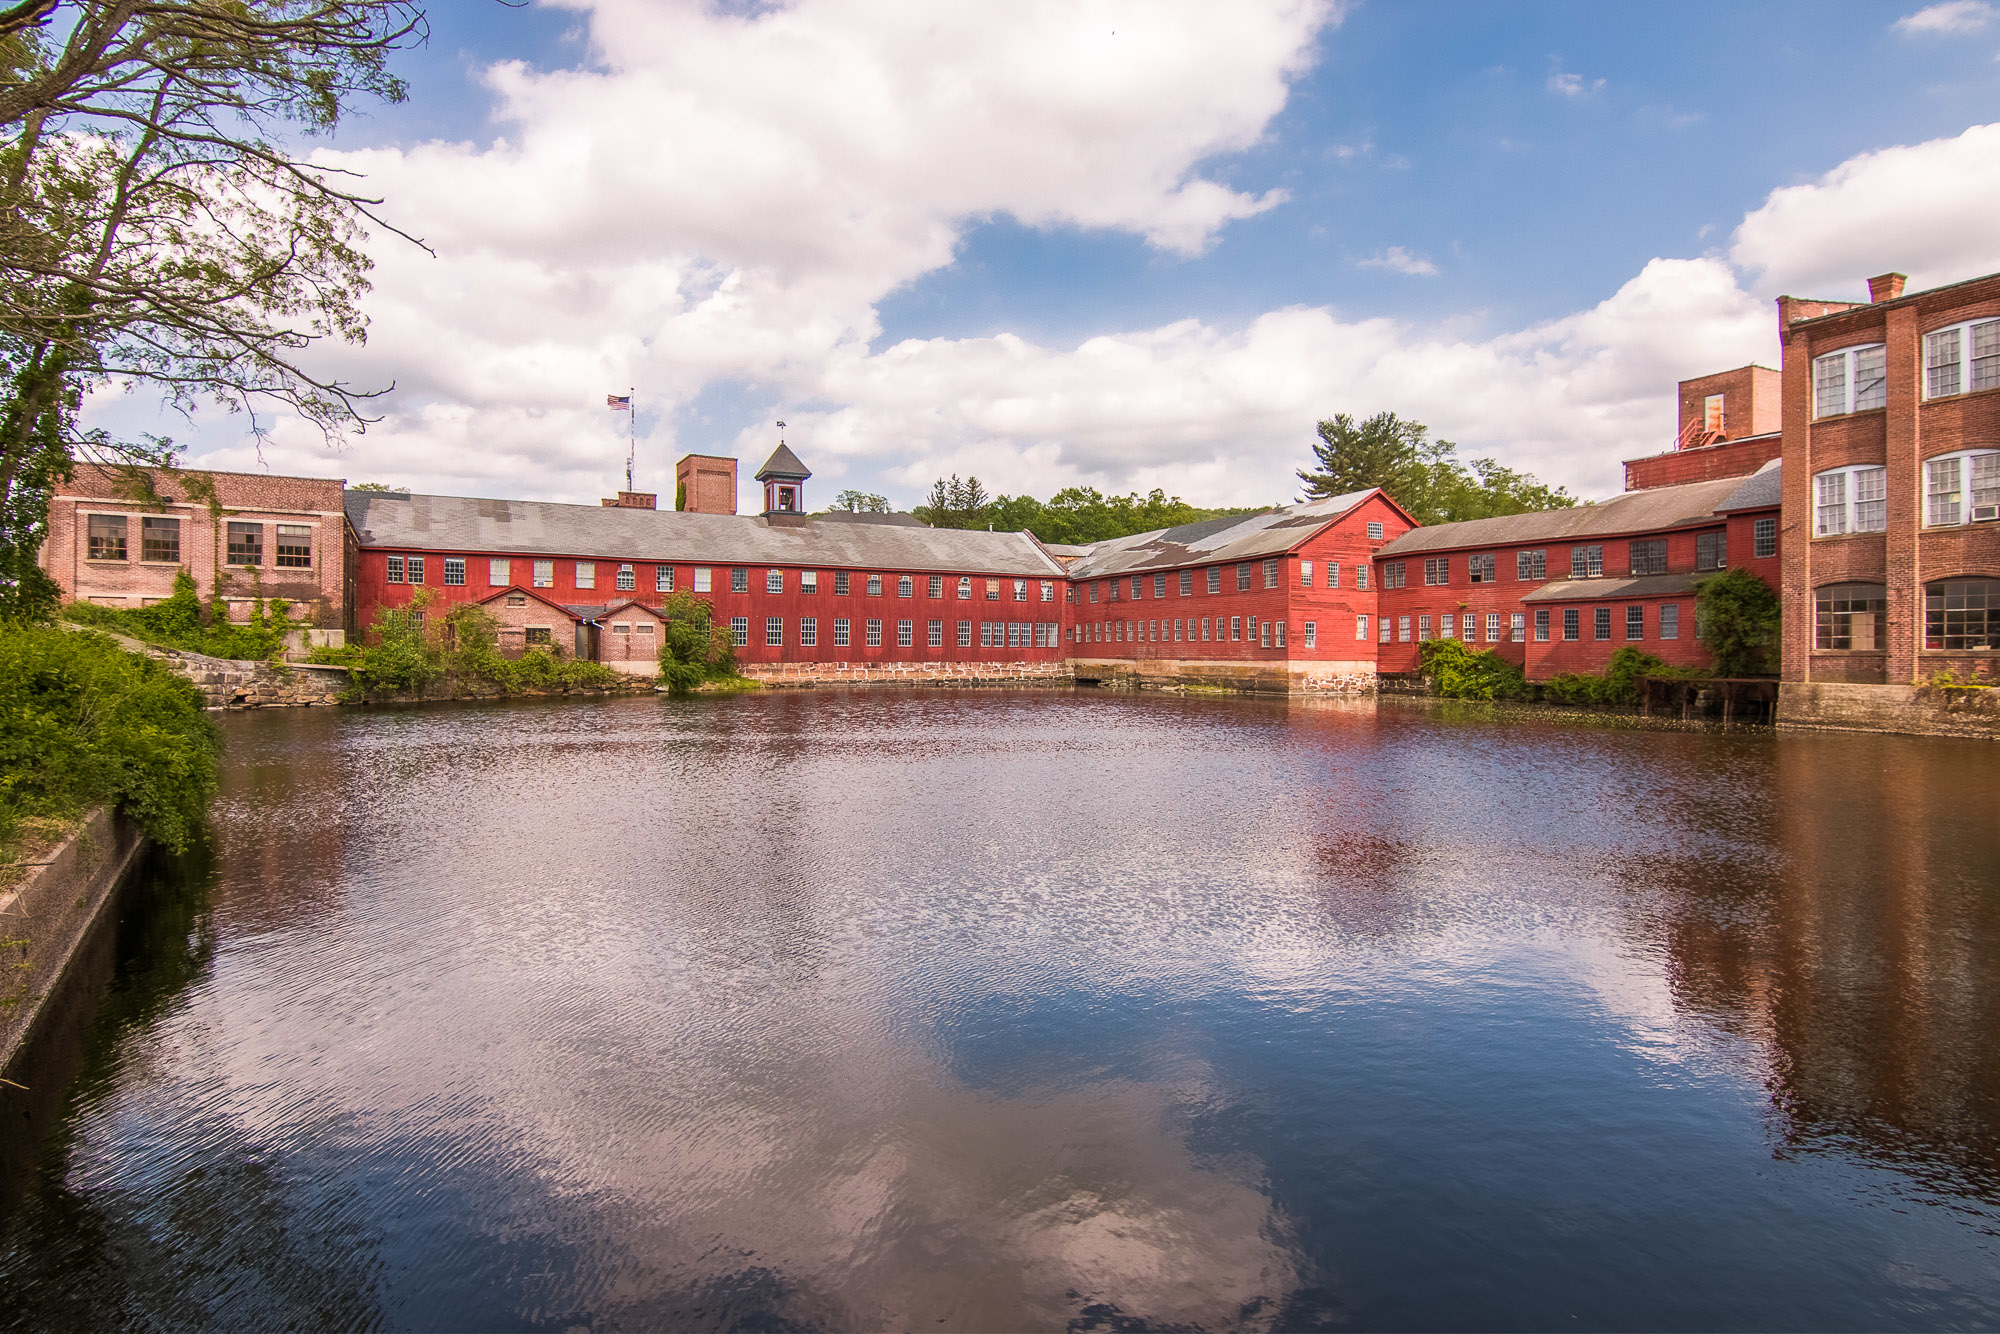 Factory in downtown Collinsville, CT. Photo copyright Miceli Productions. http://MiceliProductions.com